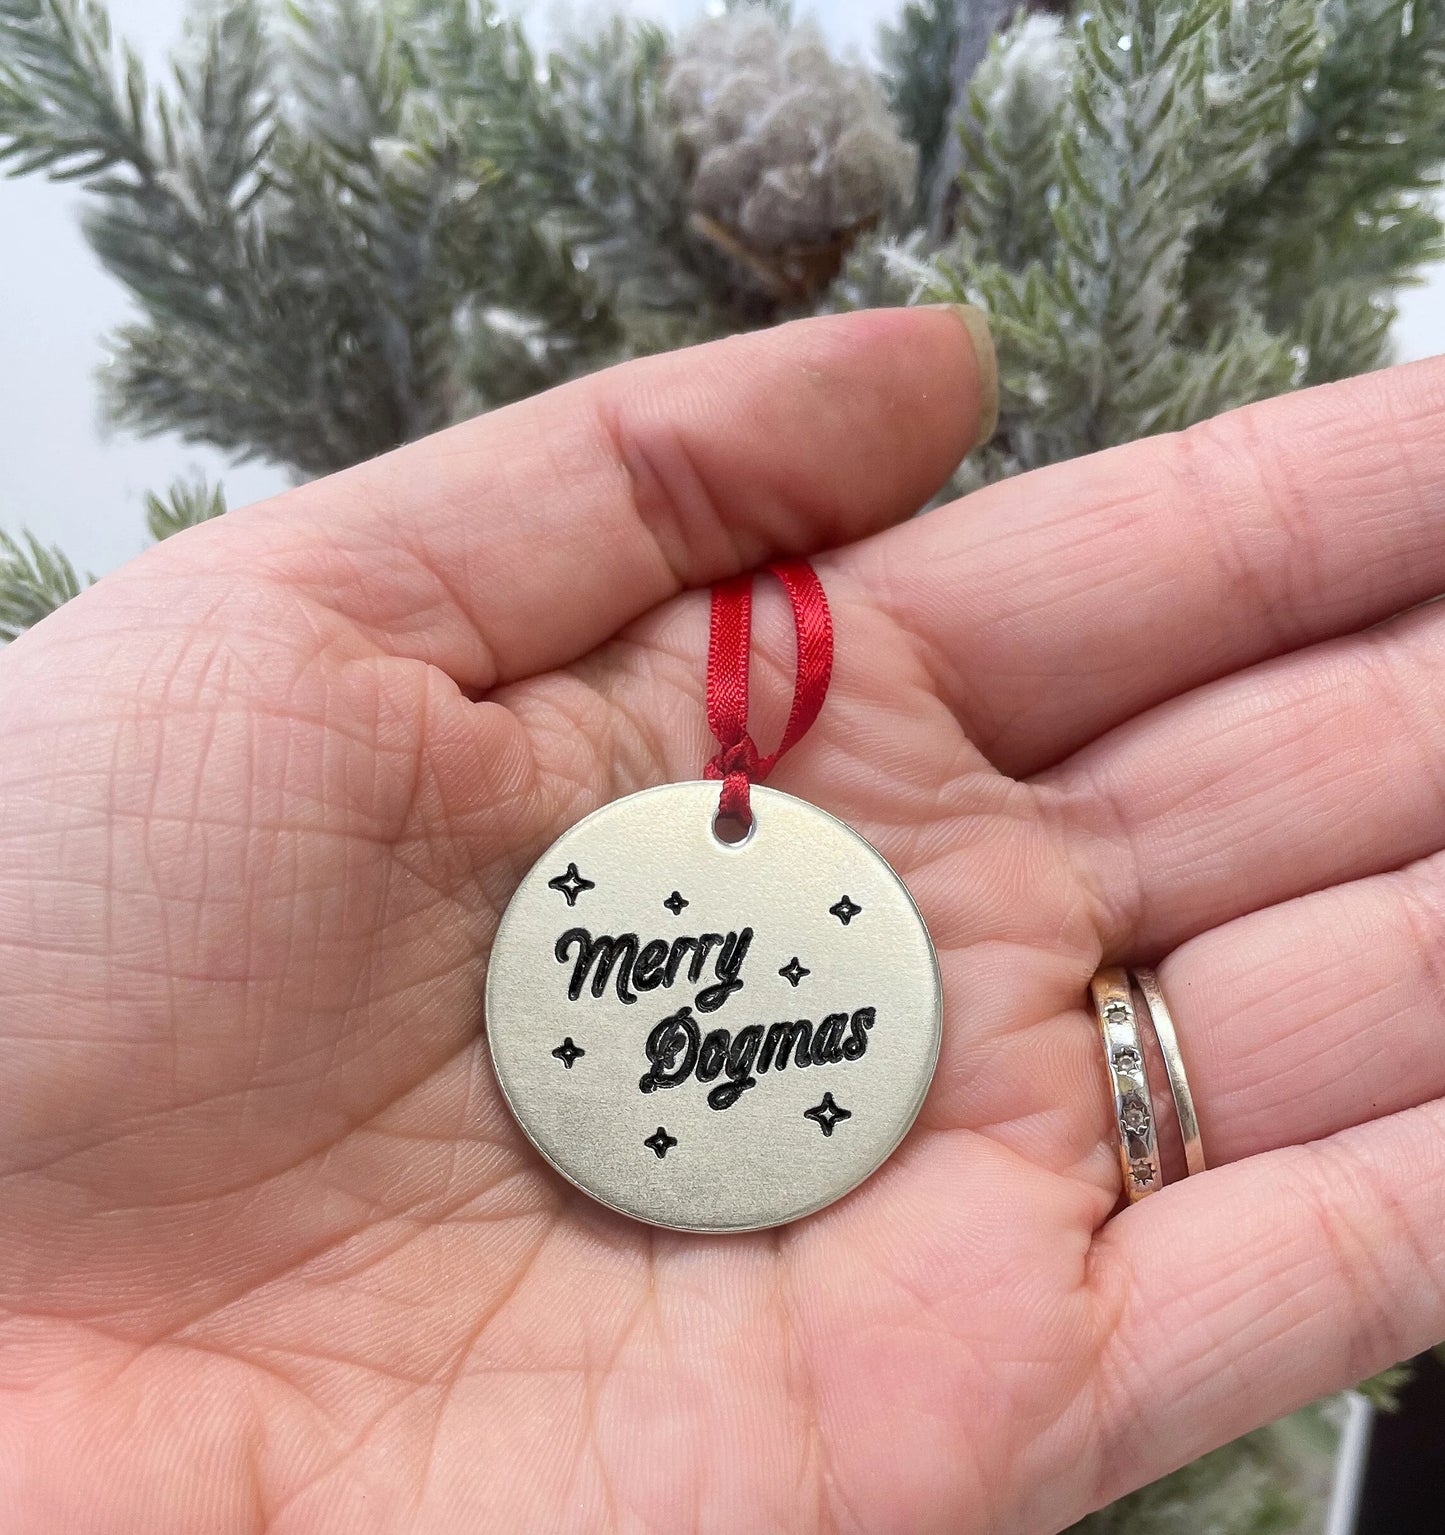 Pet's first Christmas - Dog's first Christmas - Puppy Christmas - Holiday Ornament - Secret Santa Gift - Dog Lover Gift - Dog Ornament 